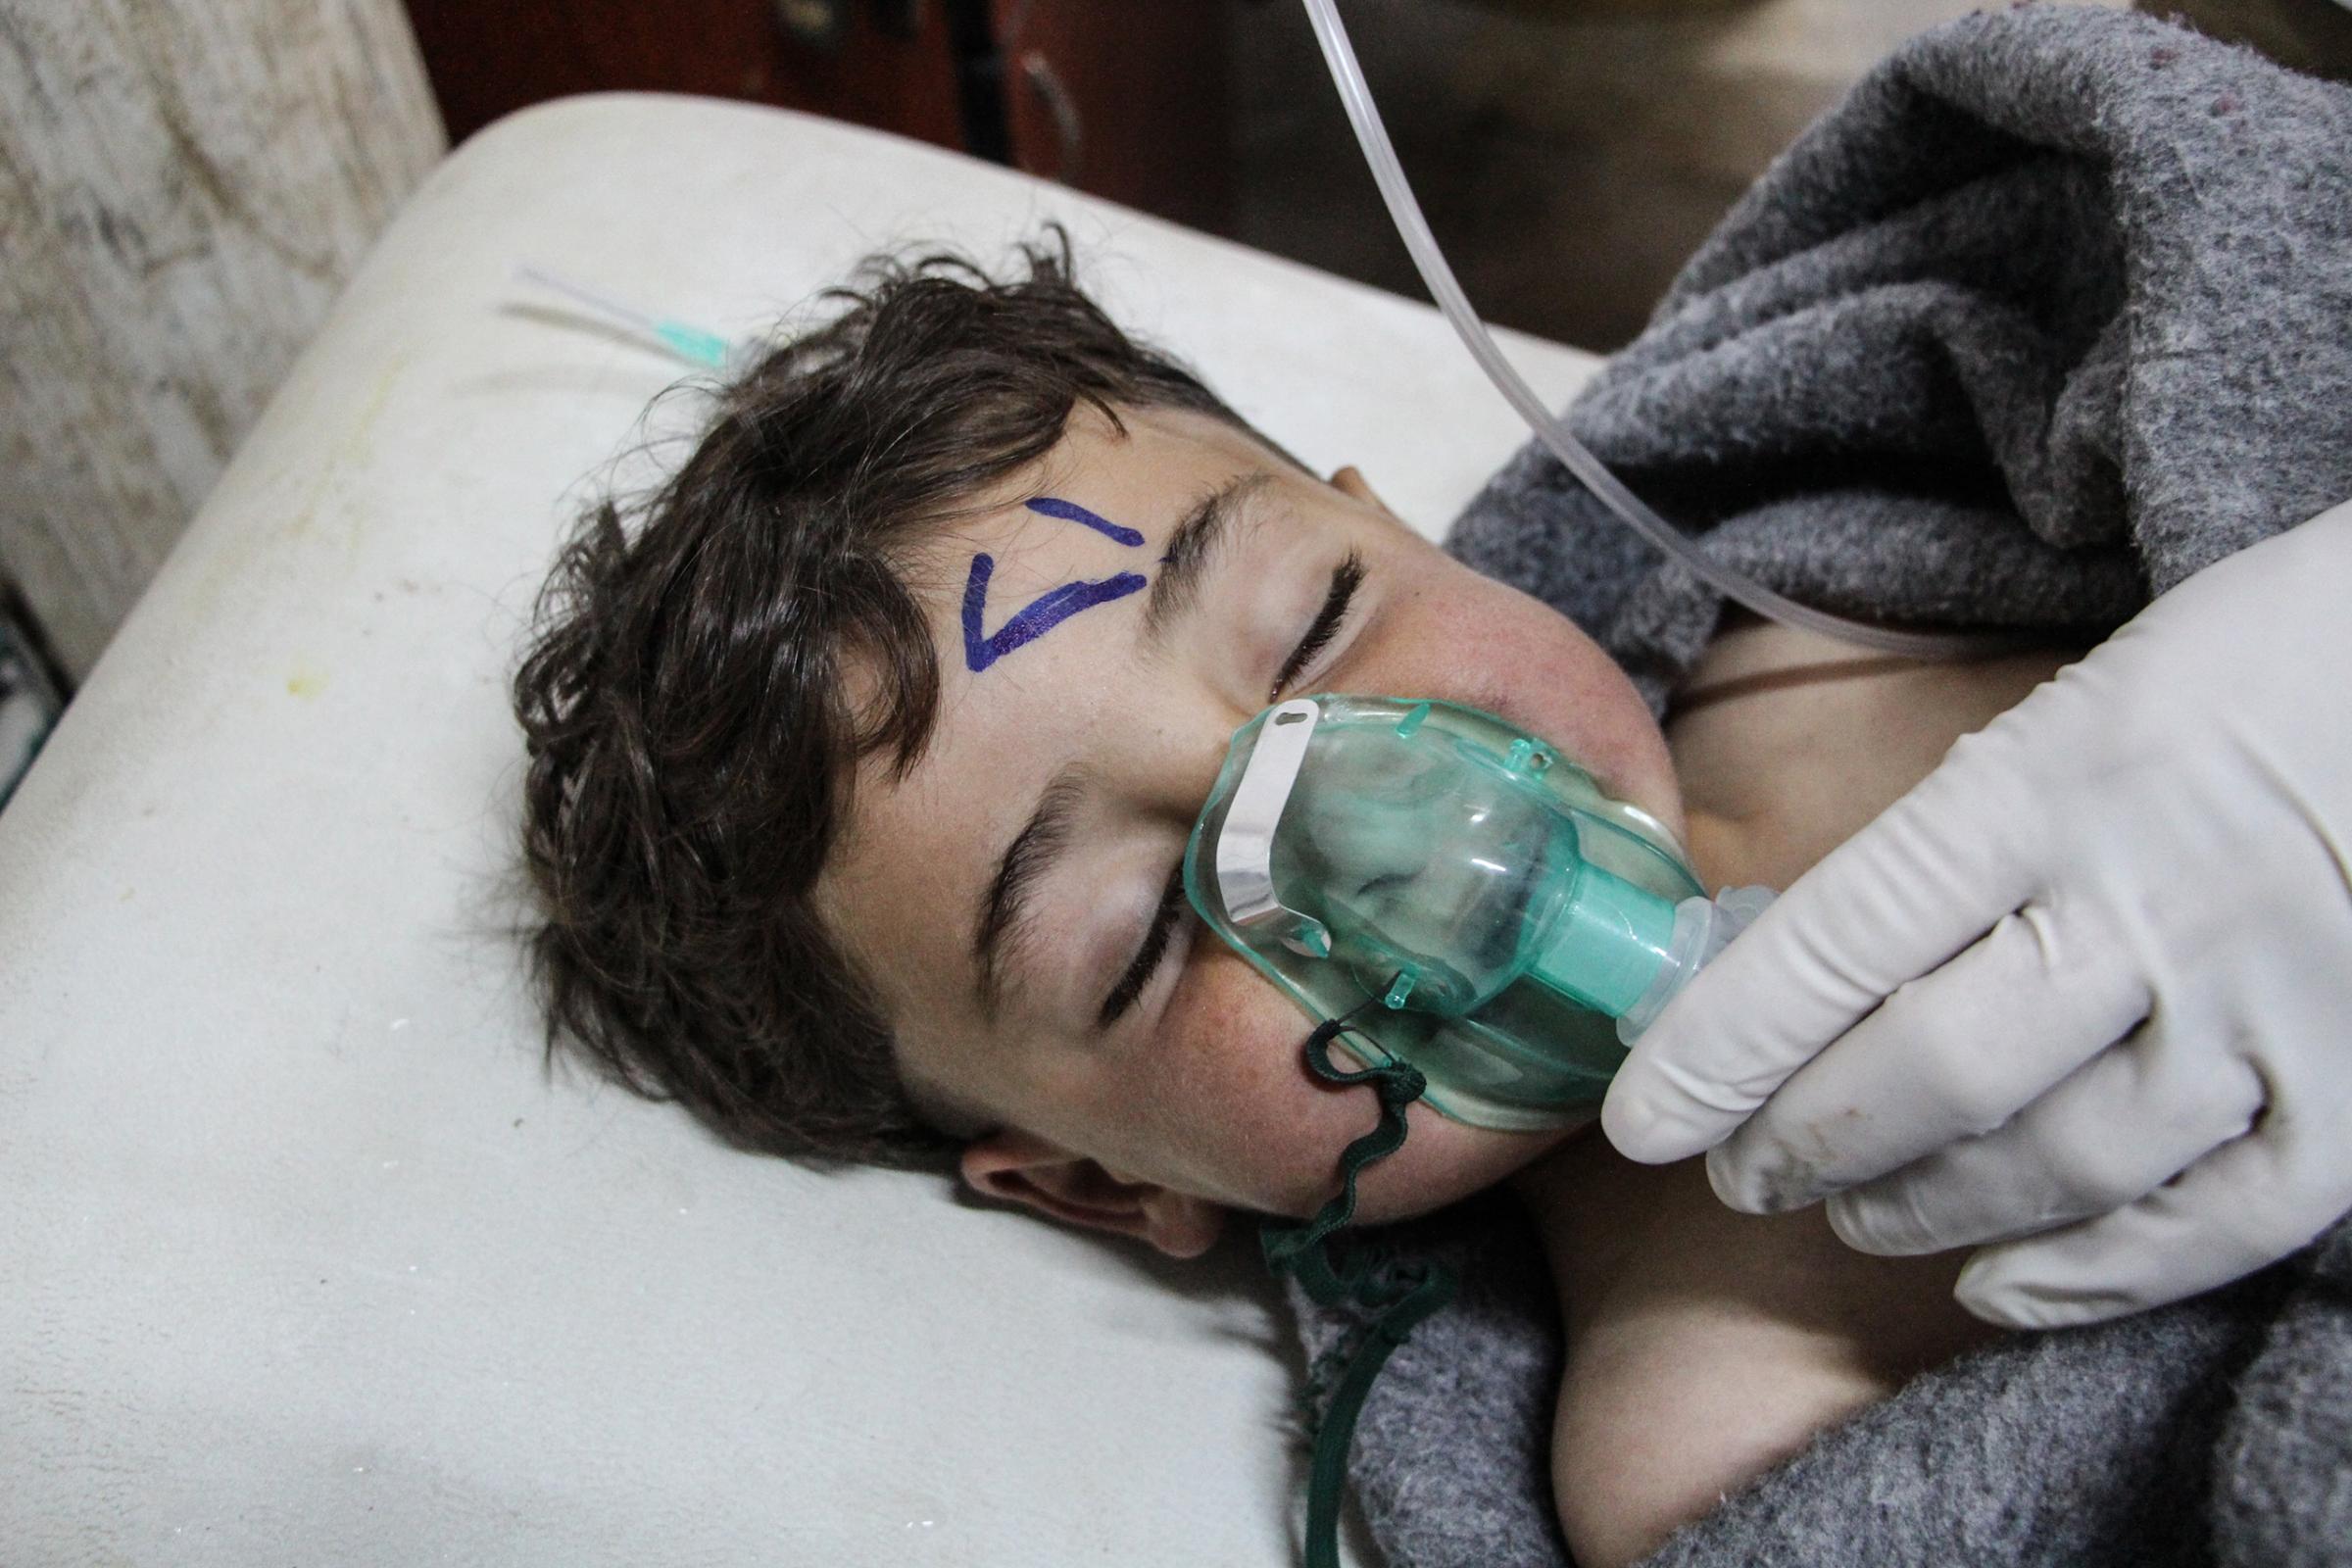 At least 58 killed in suspected gas attack in northern Syria, NGO